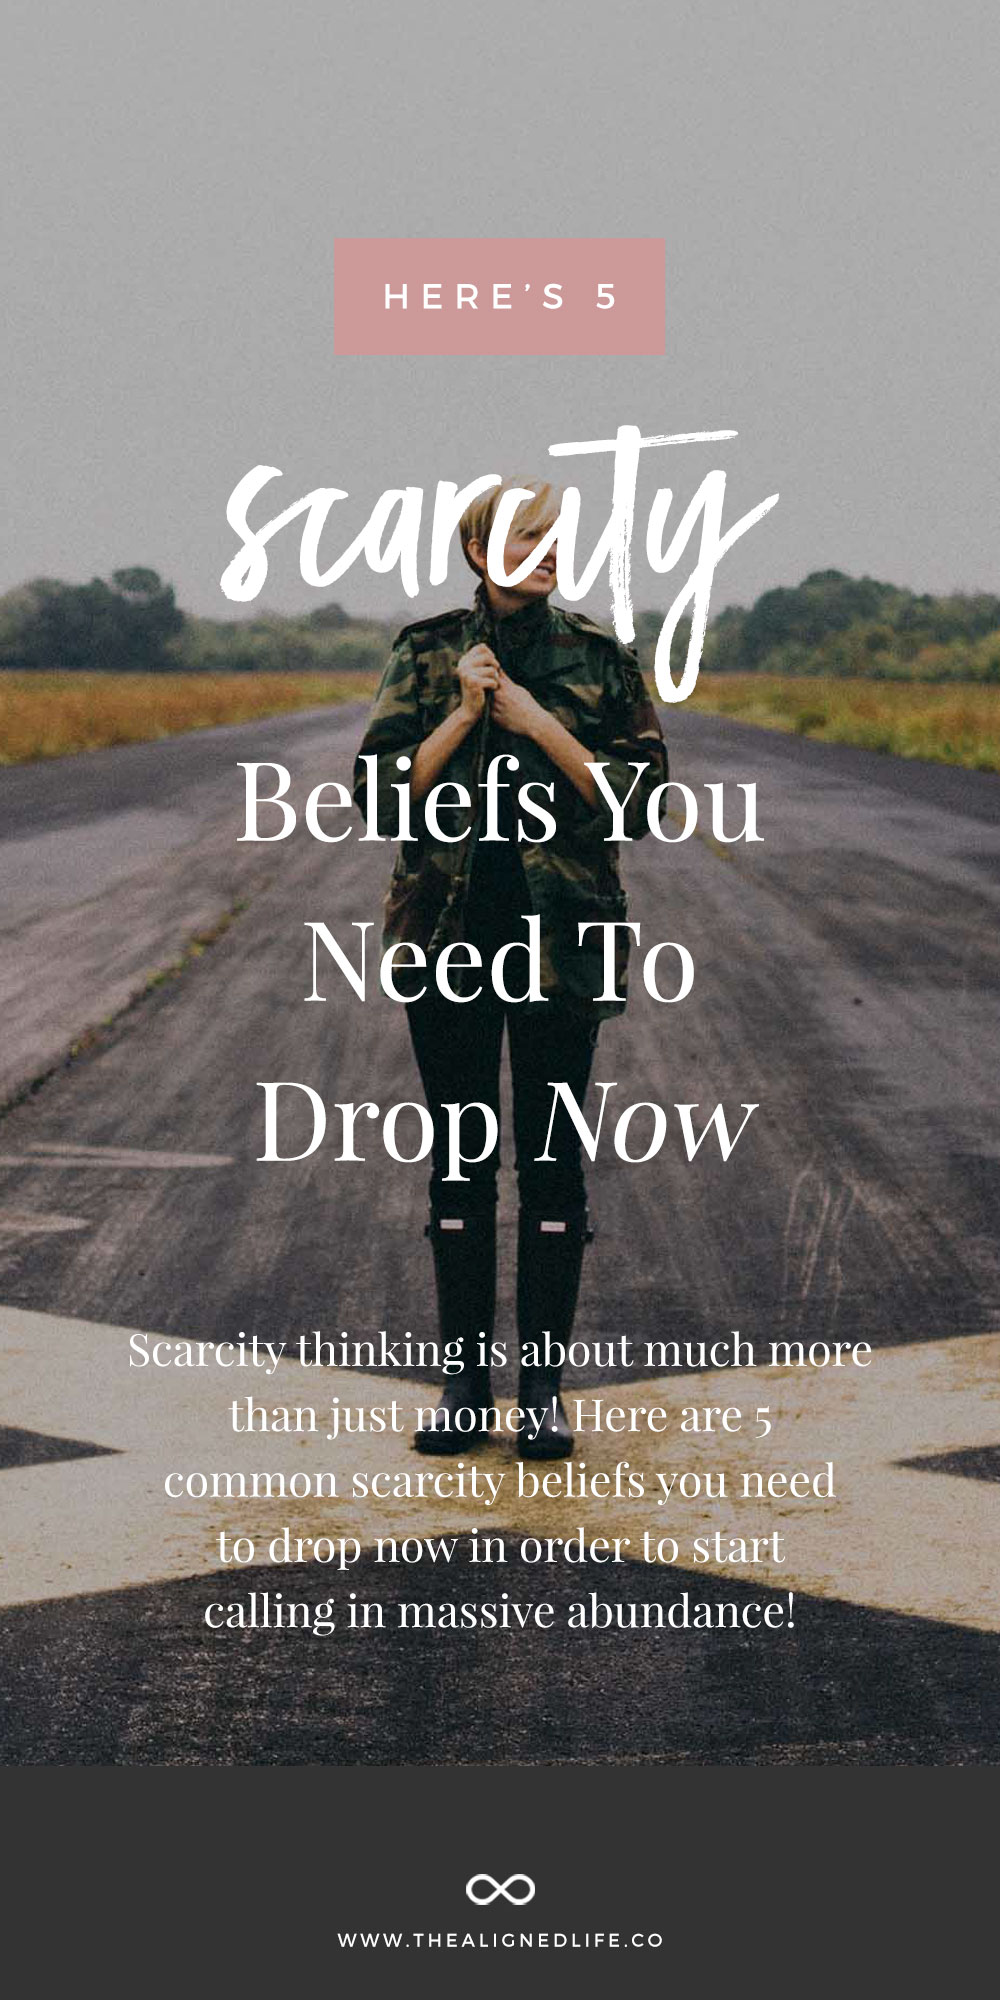 5 Scarcity Beliefs You Need To Drop NOW!